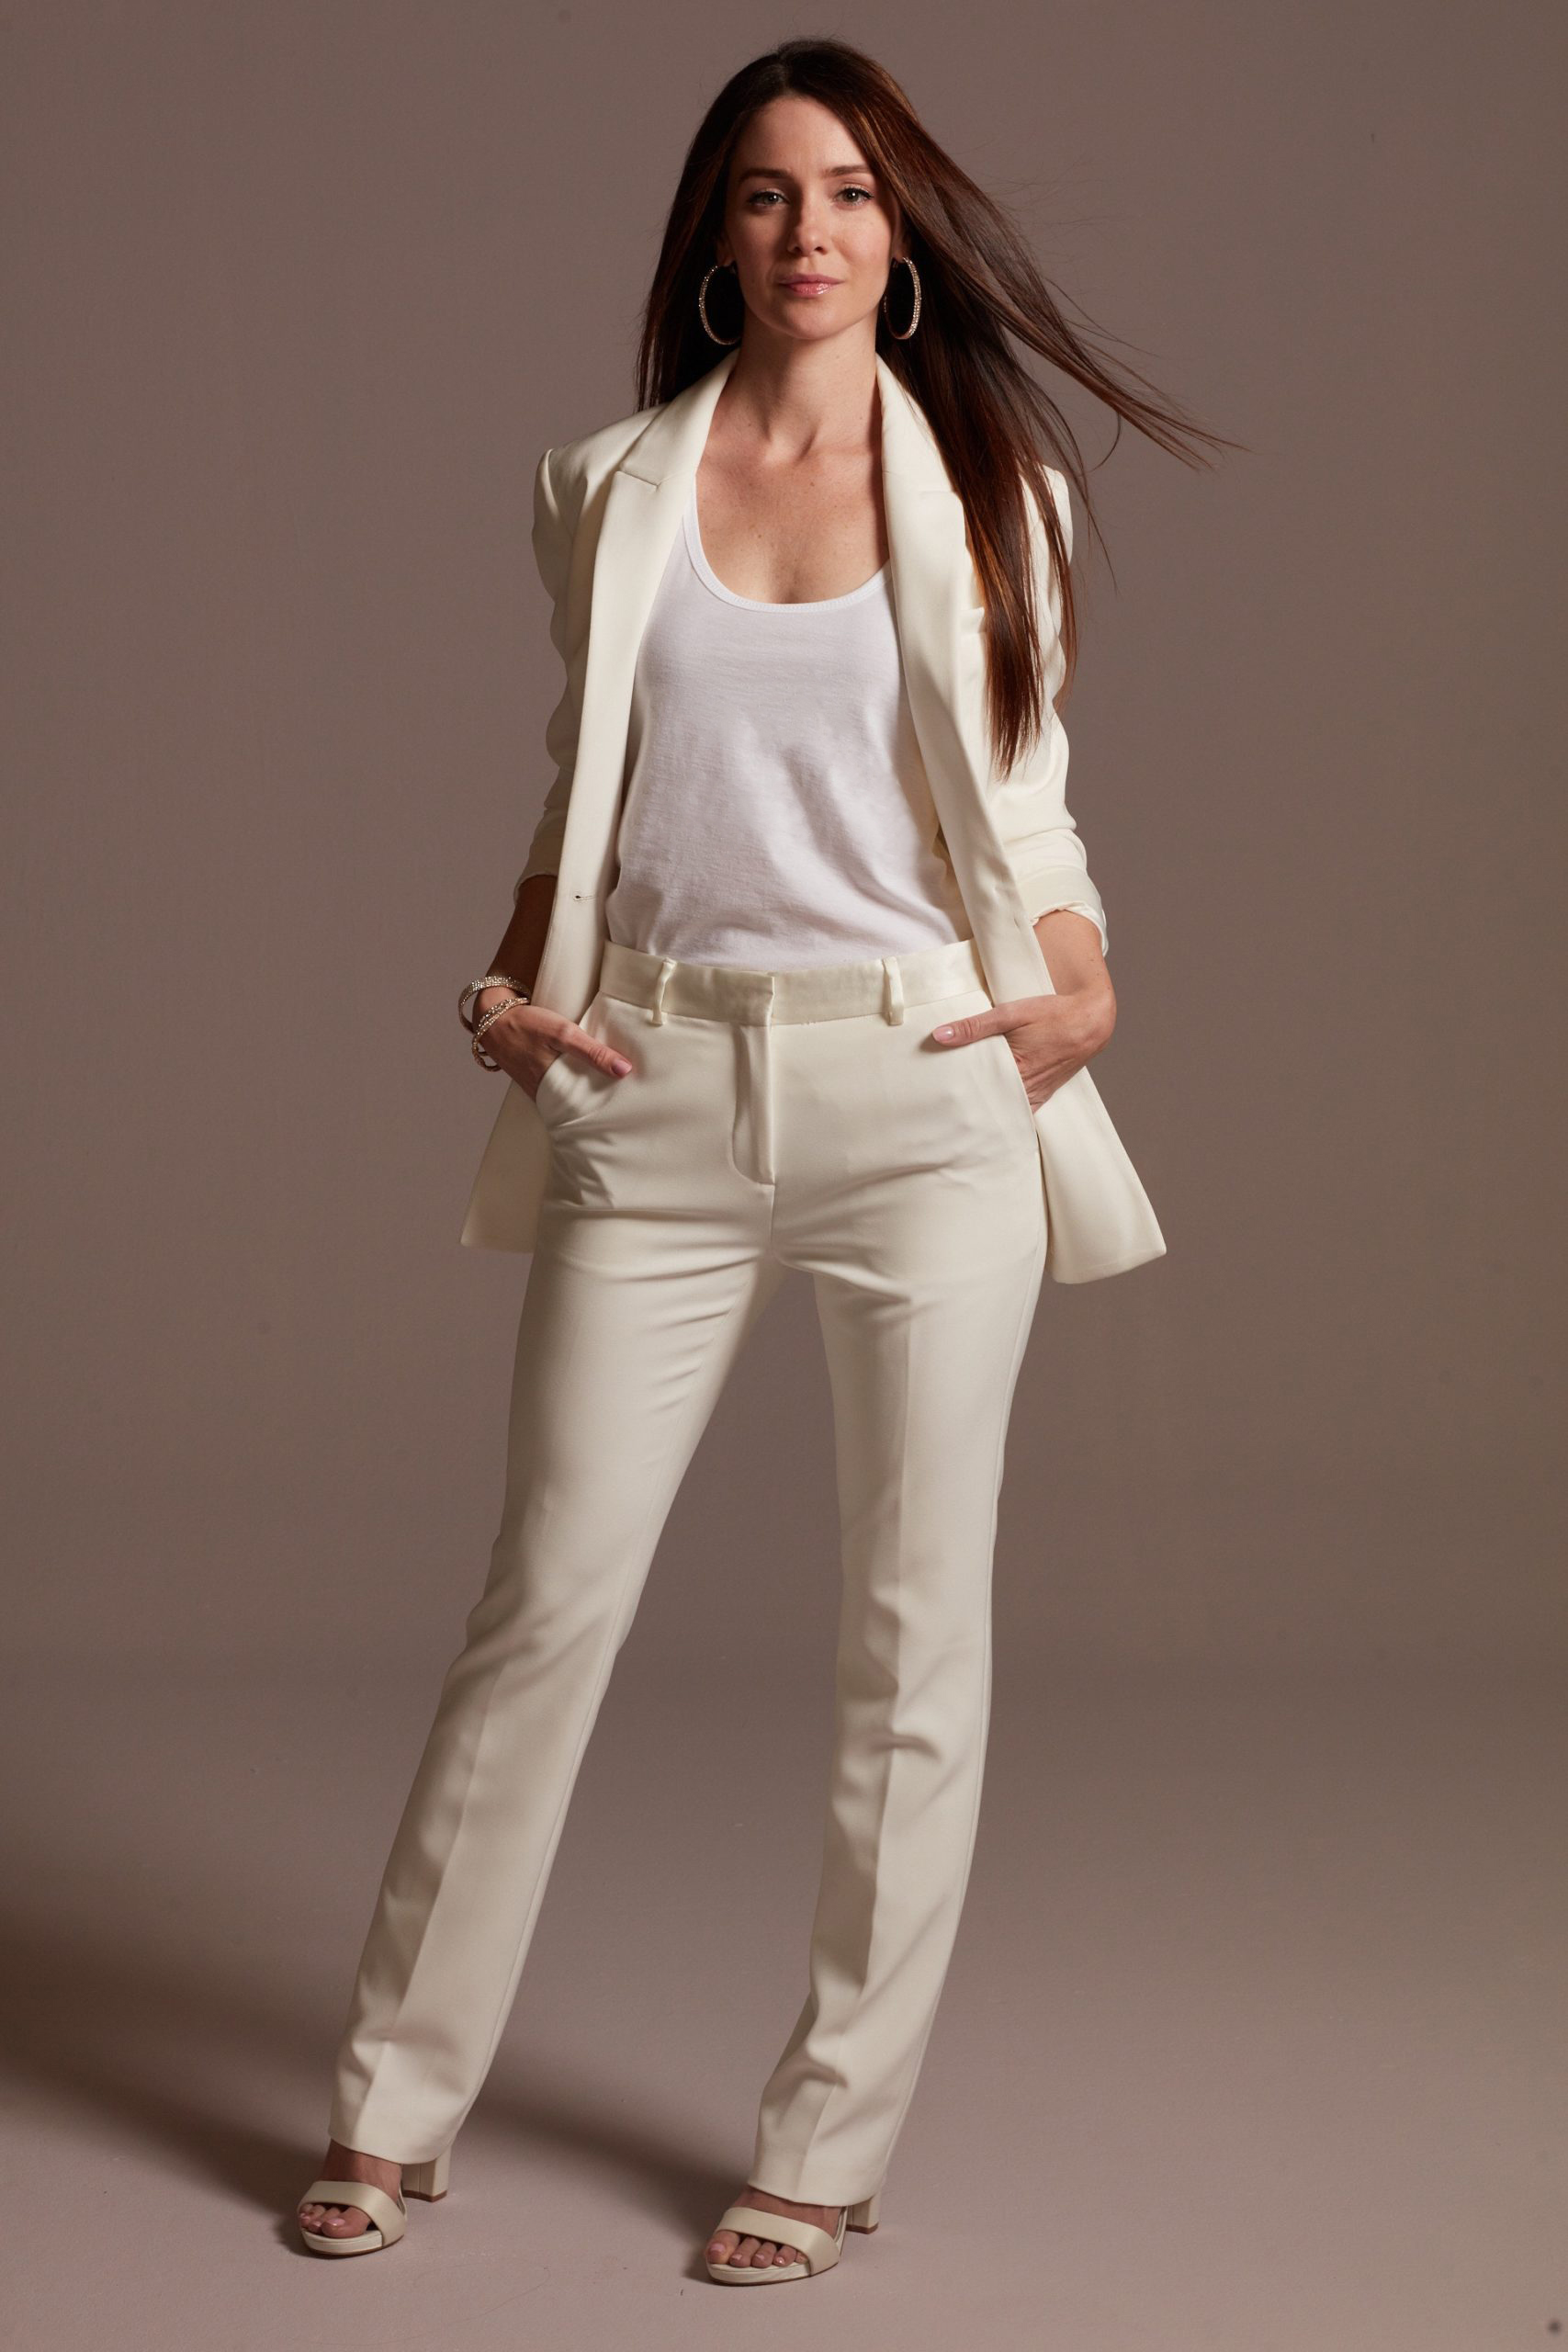 Casually styled white bridal pantsuit